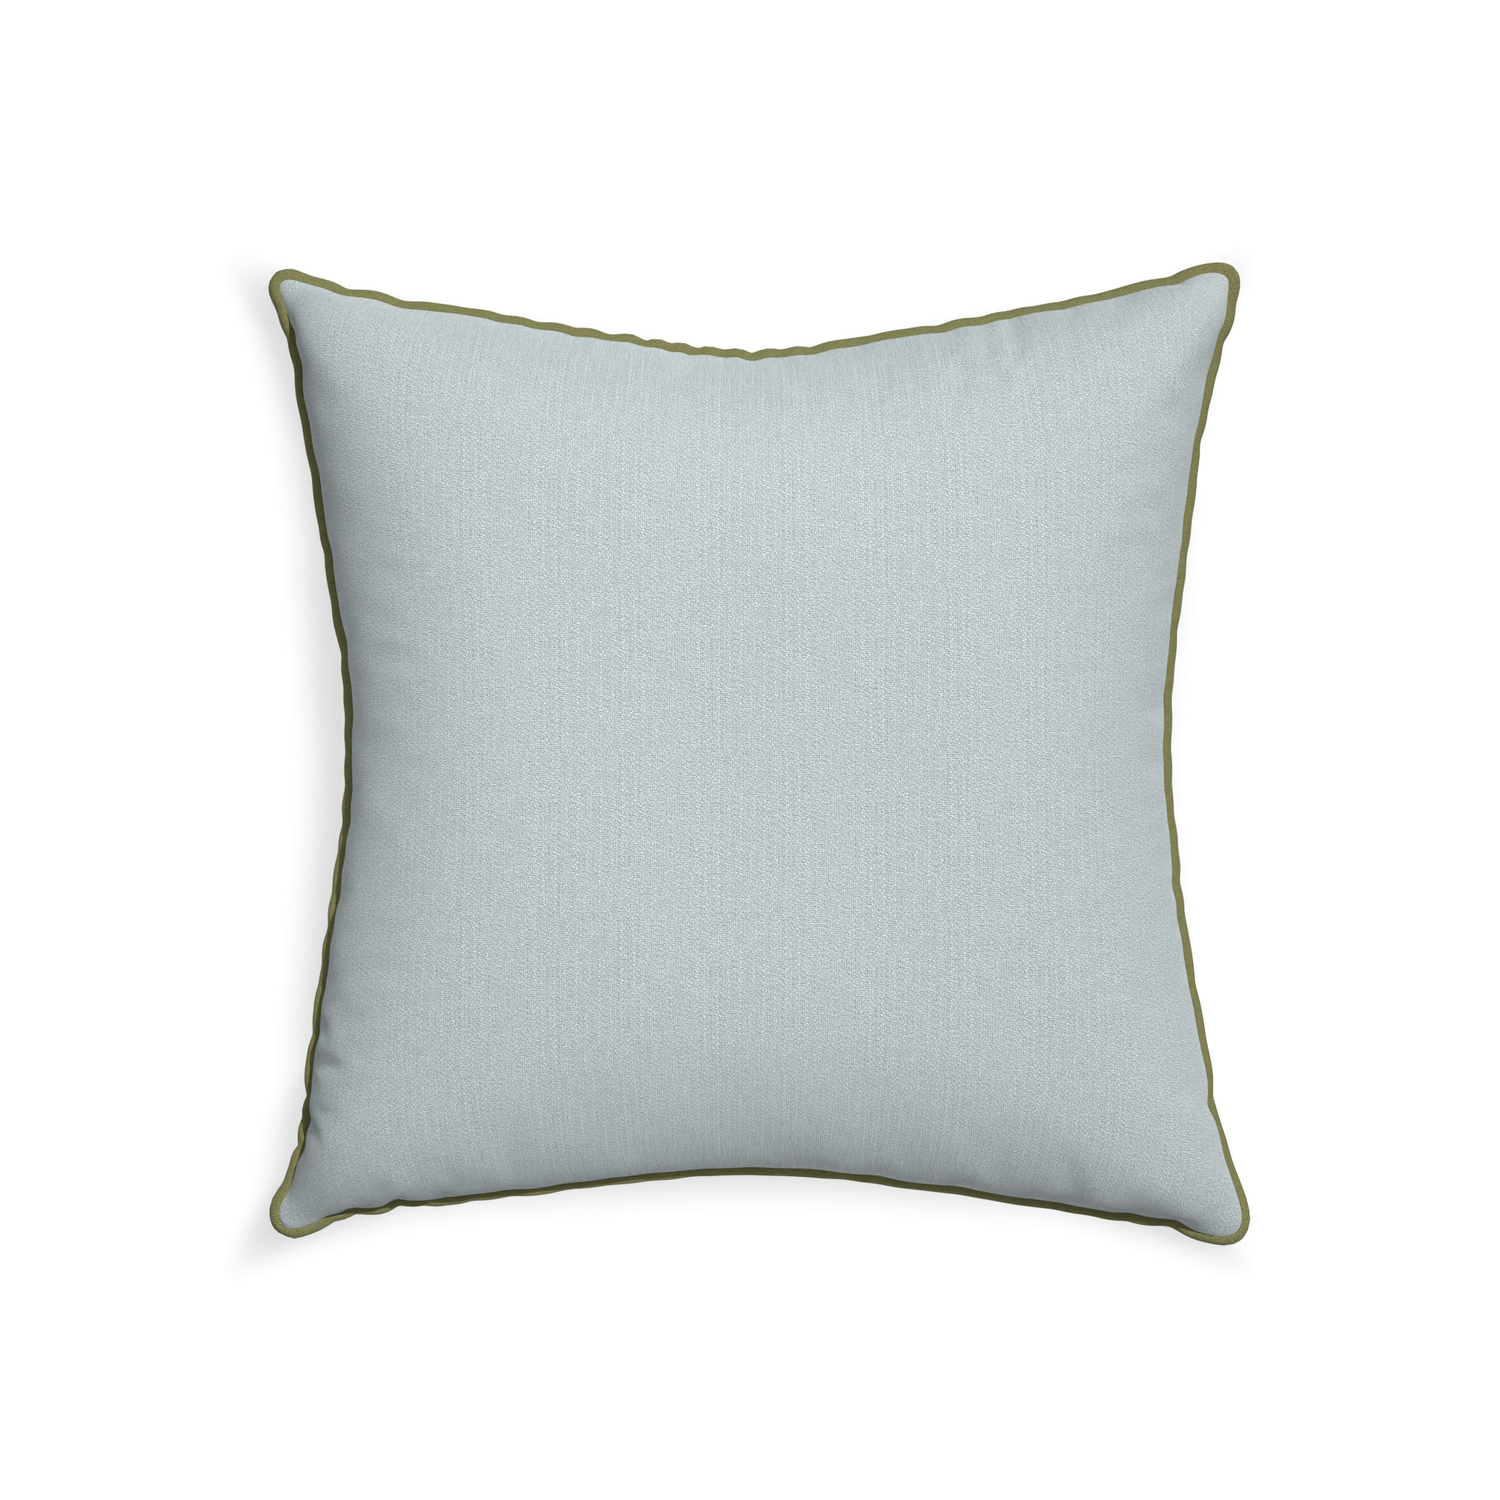 22-square sea custom grey bluepillow with moss piping on white background